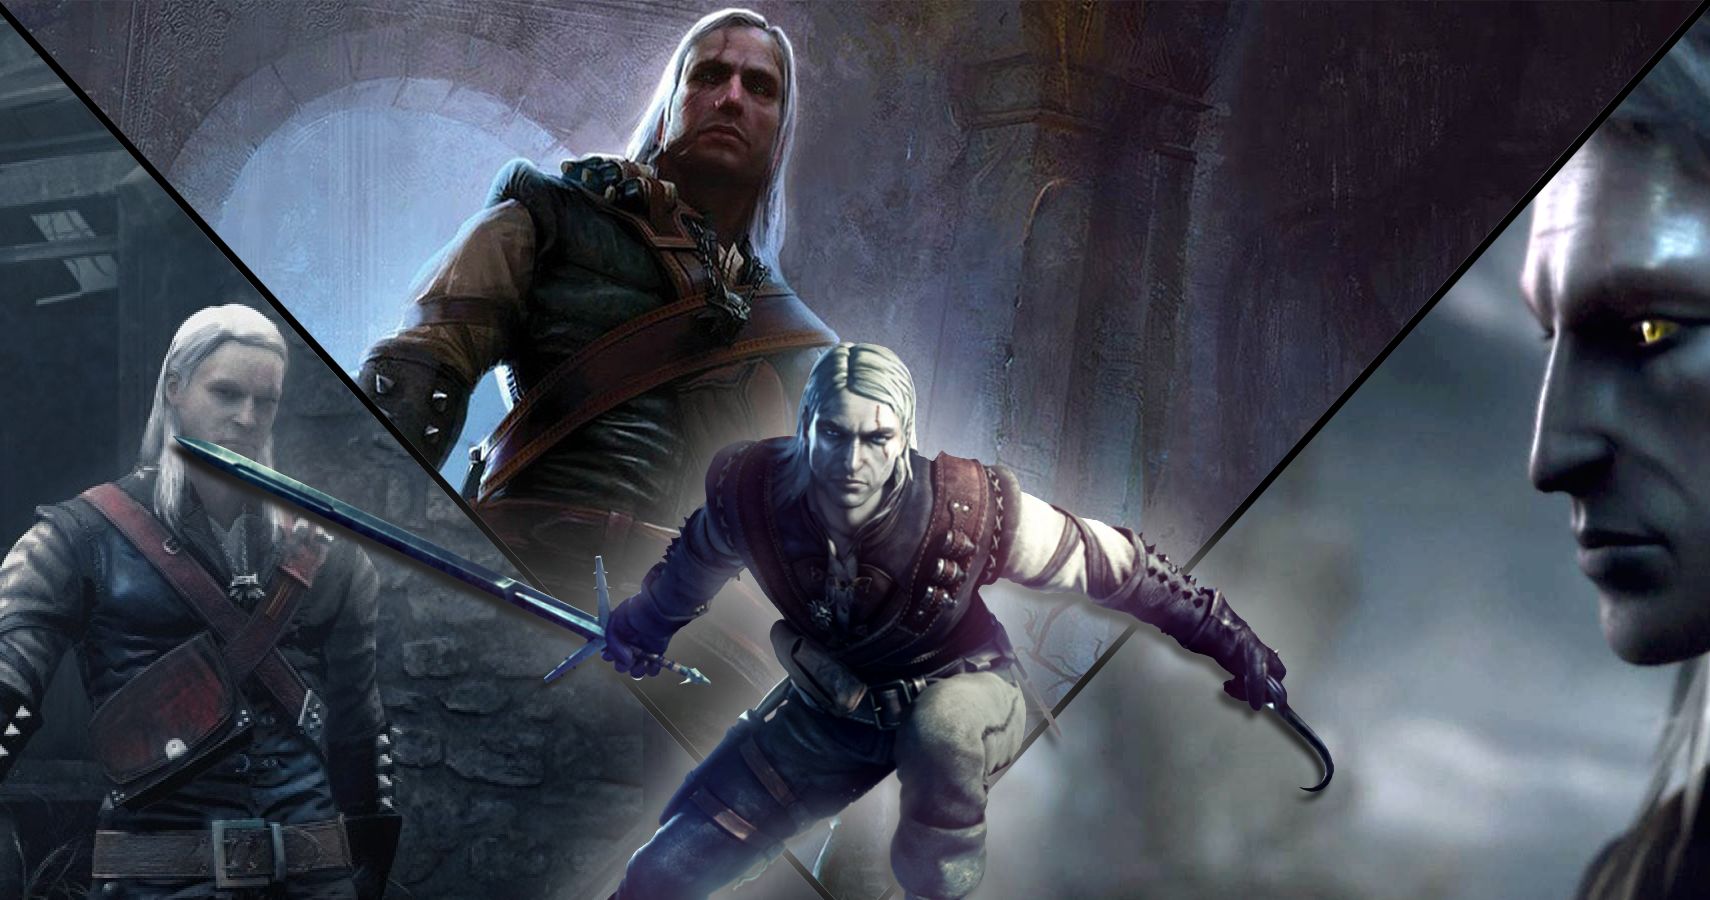 The Witcher 1 Vs The Witcher 2 - Assassins of Kings Vs The Witcher